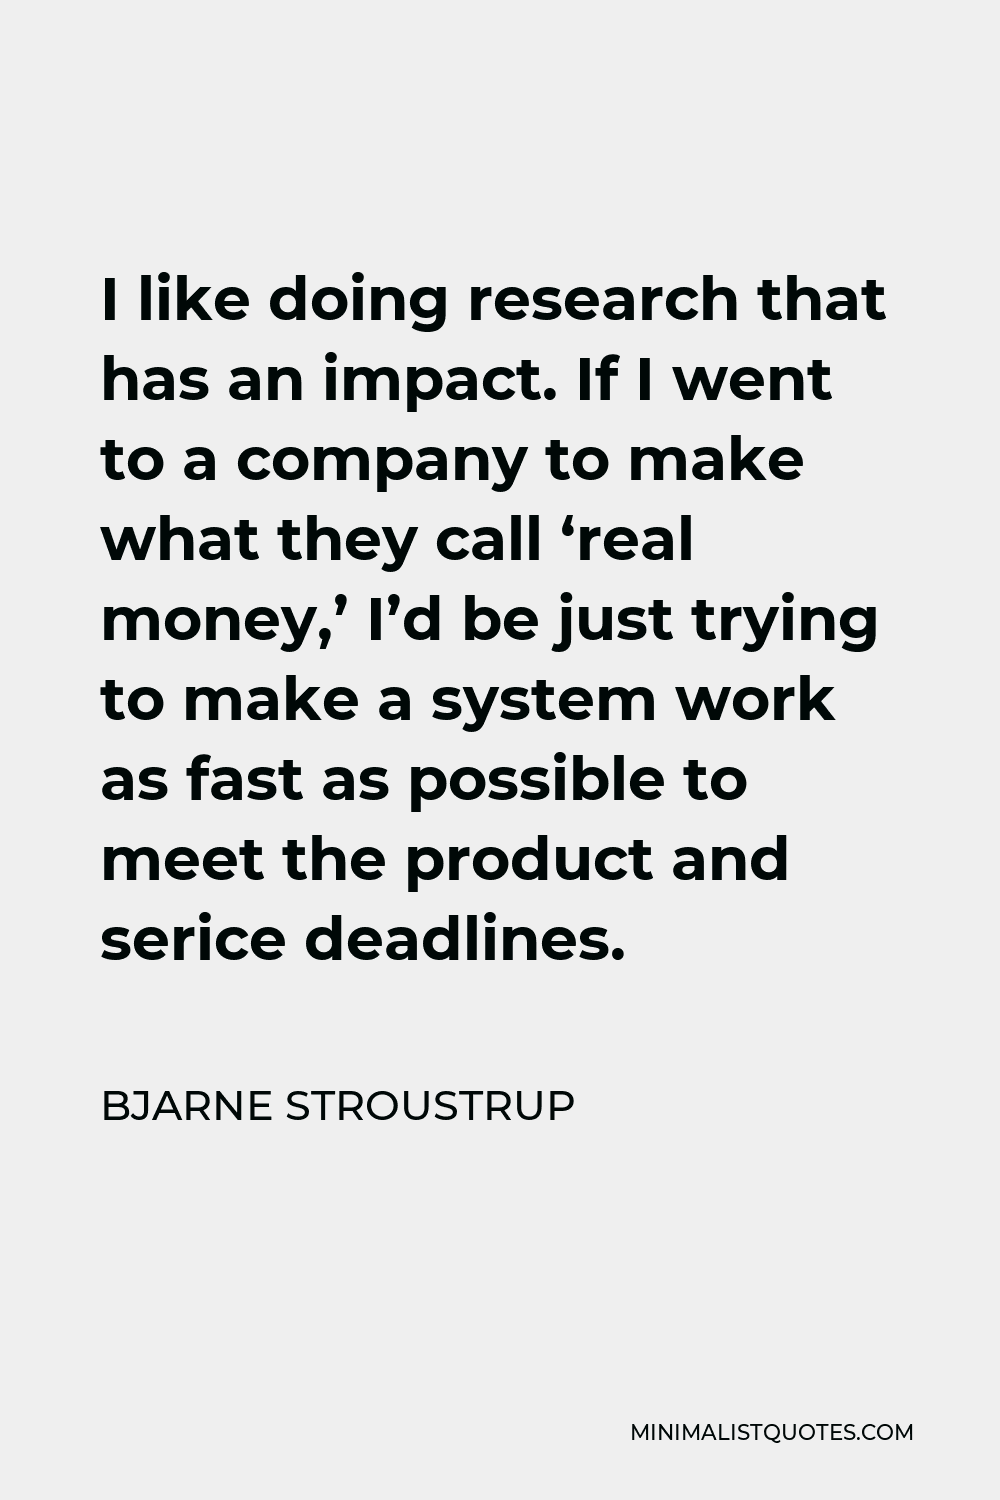 Bjarne Stroustrup Quote - I like doing research that has an impact. If I went to a company to make what they call ‘real money,’ I’d be just trying to make a system work as fast as possible to meet the product and serice deadlines.